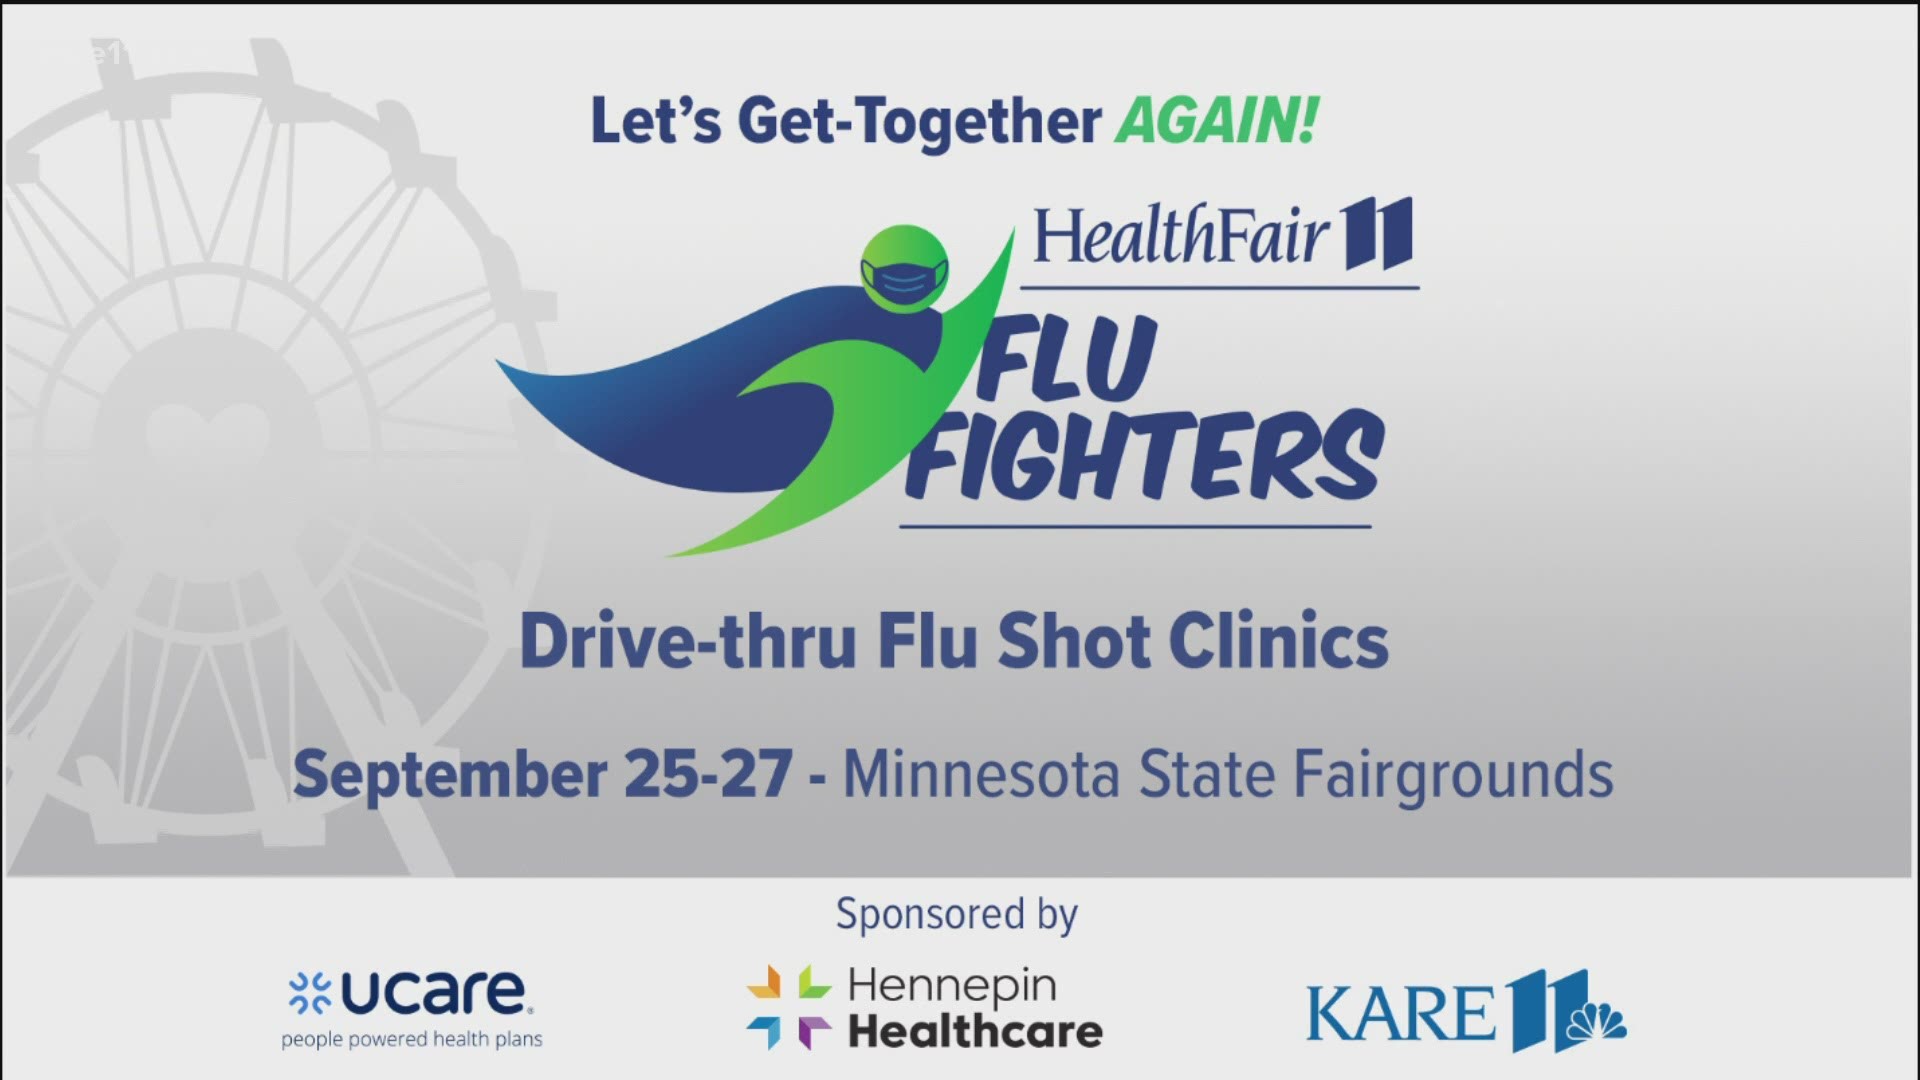 HealthFair 11 and UCare are hosting a drive-thru Flu Fighter Clinic Sept. 25-27 at the state fairgrounds